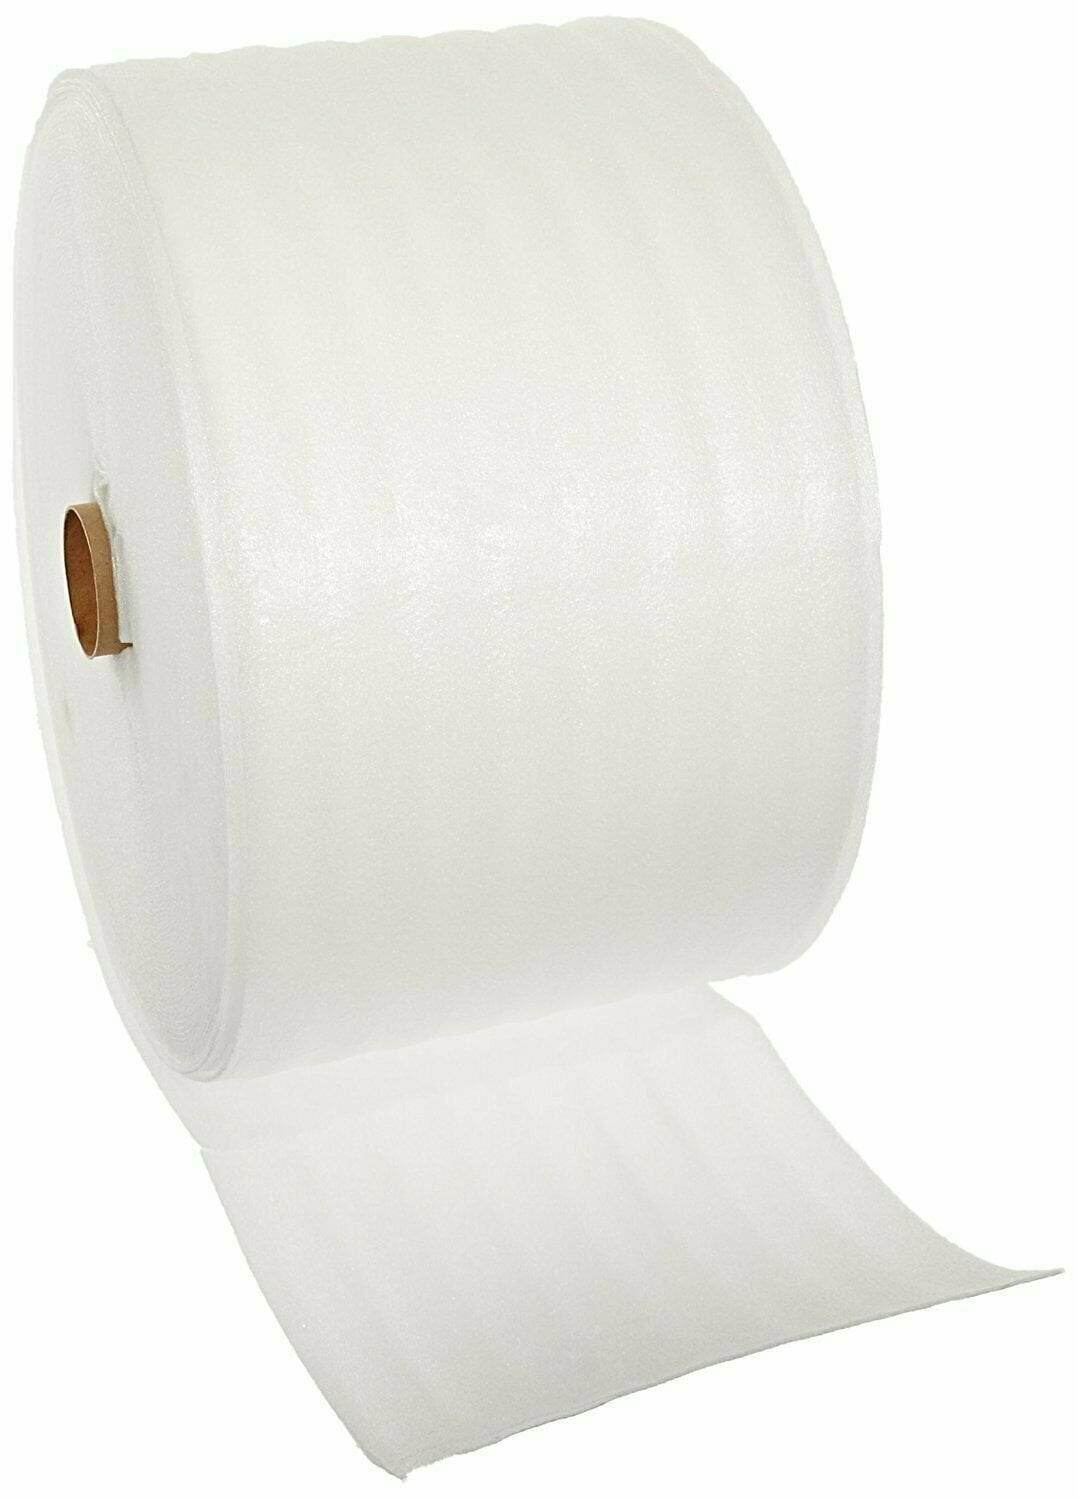  PUREVACY Foam Wrap Roll for Packing. 6 Rolls of White Packing  Foam Sheets for Moving 12 x 60' Thick Poly Packing Foam Roll, Moving  Supplies for Dishes and Glasses, Dish Packing